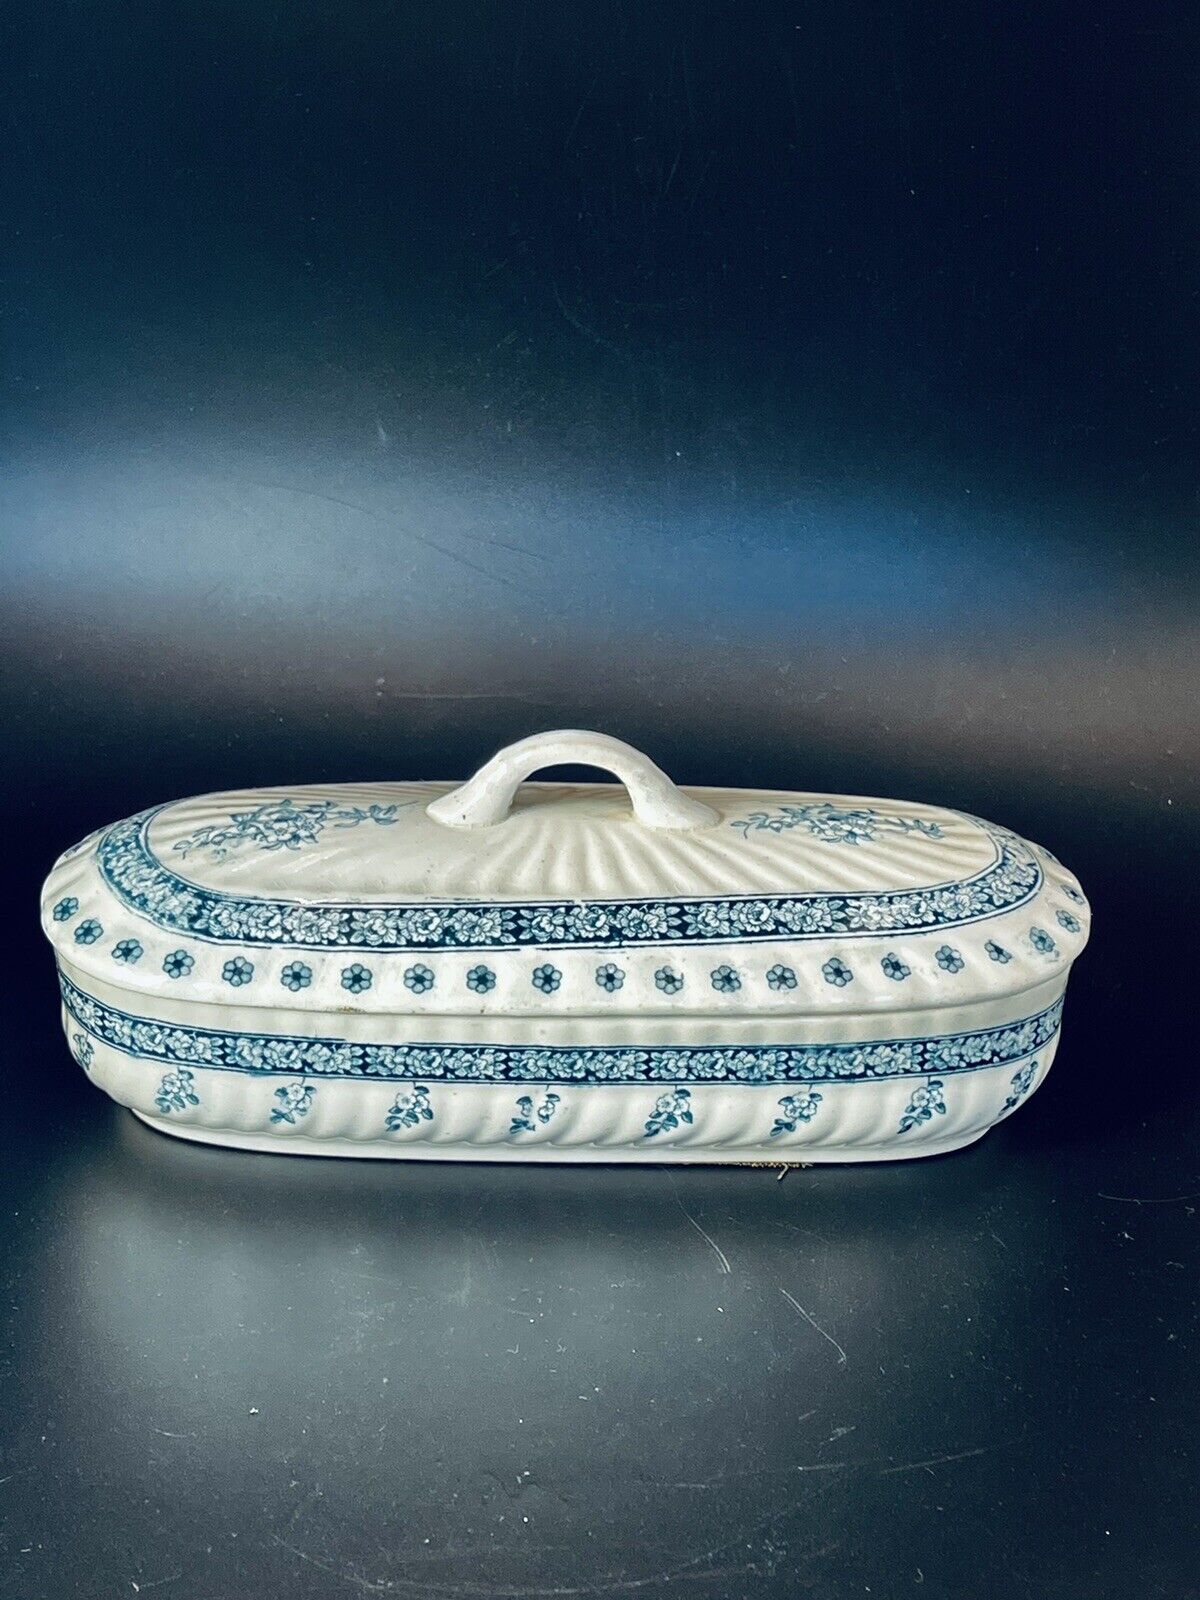 Antique Davenport razor / toothbrush dish with lid, blue & white Flower